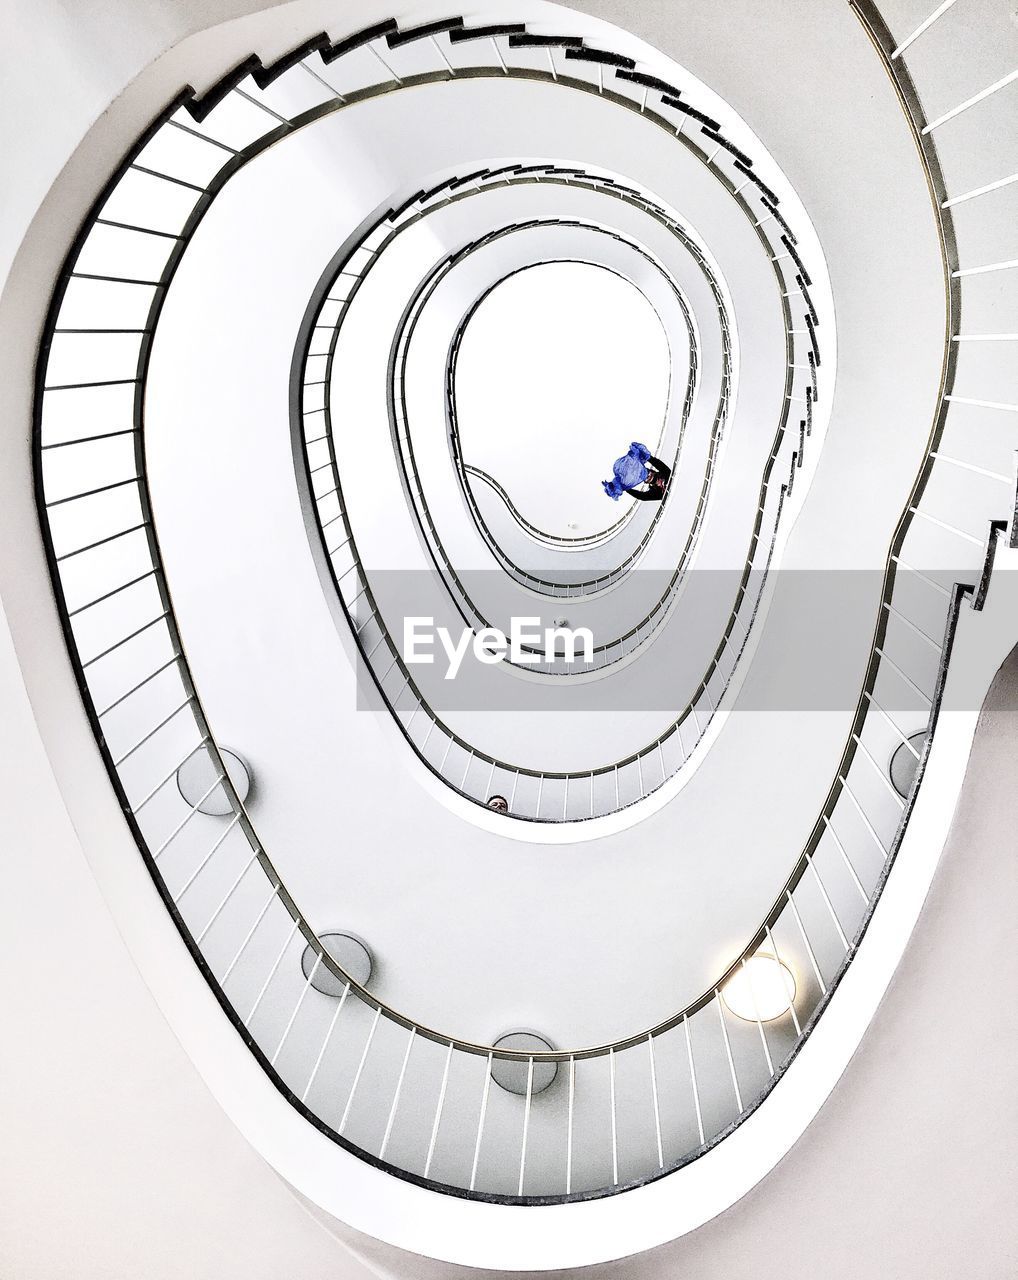 Directly below shot of spiral staircases in building